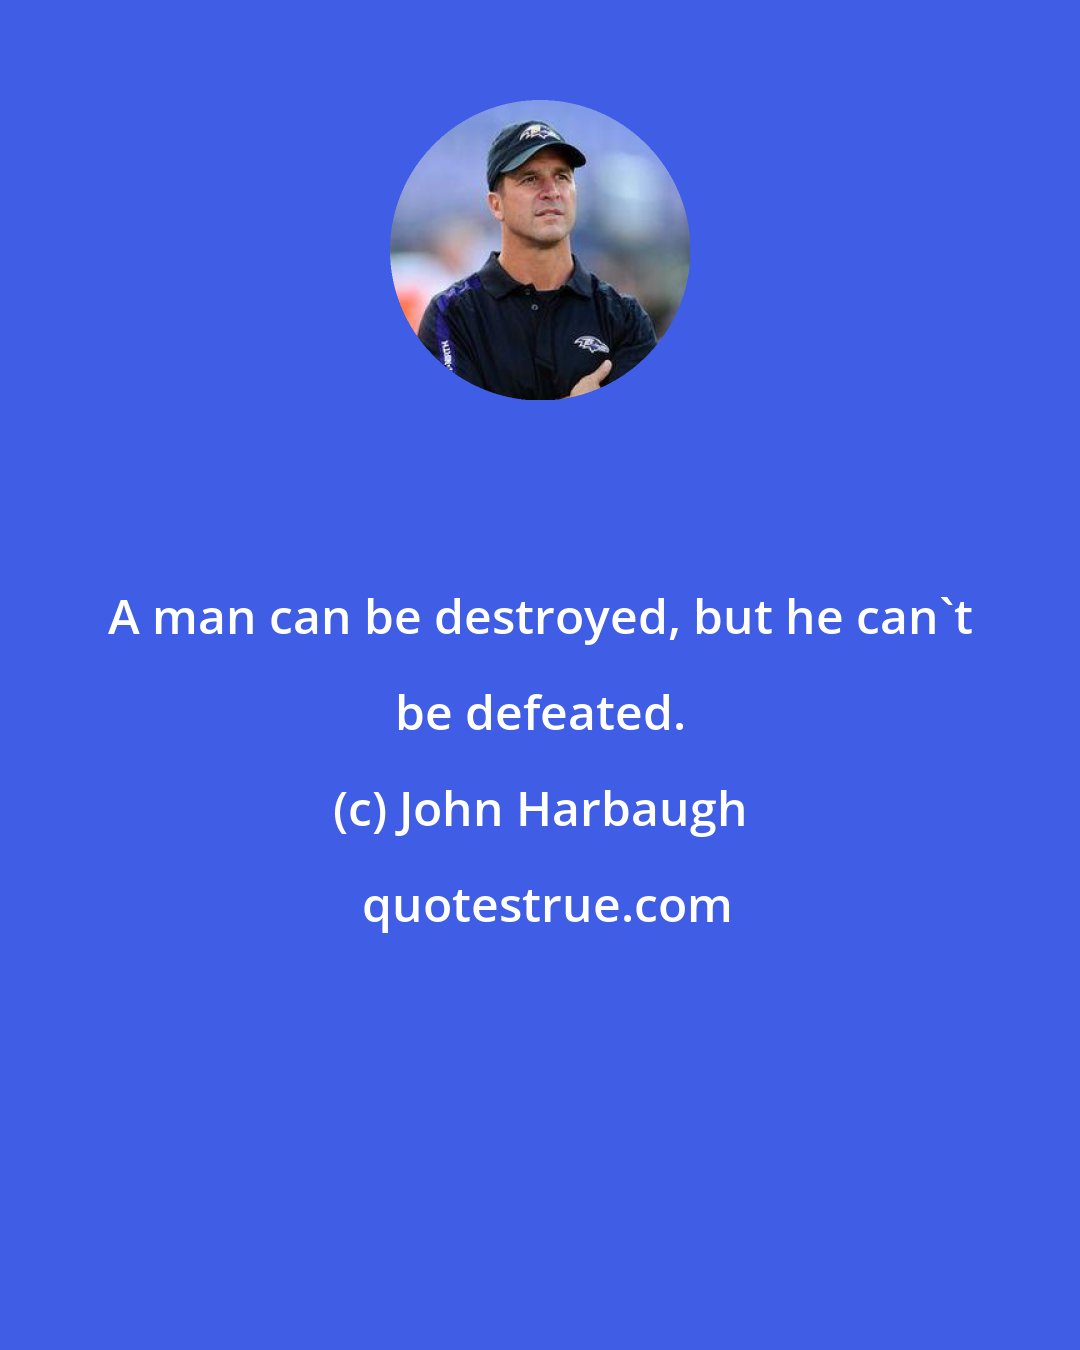 John Harbaugh: A man can be destroyed, but he can't be defeated.